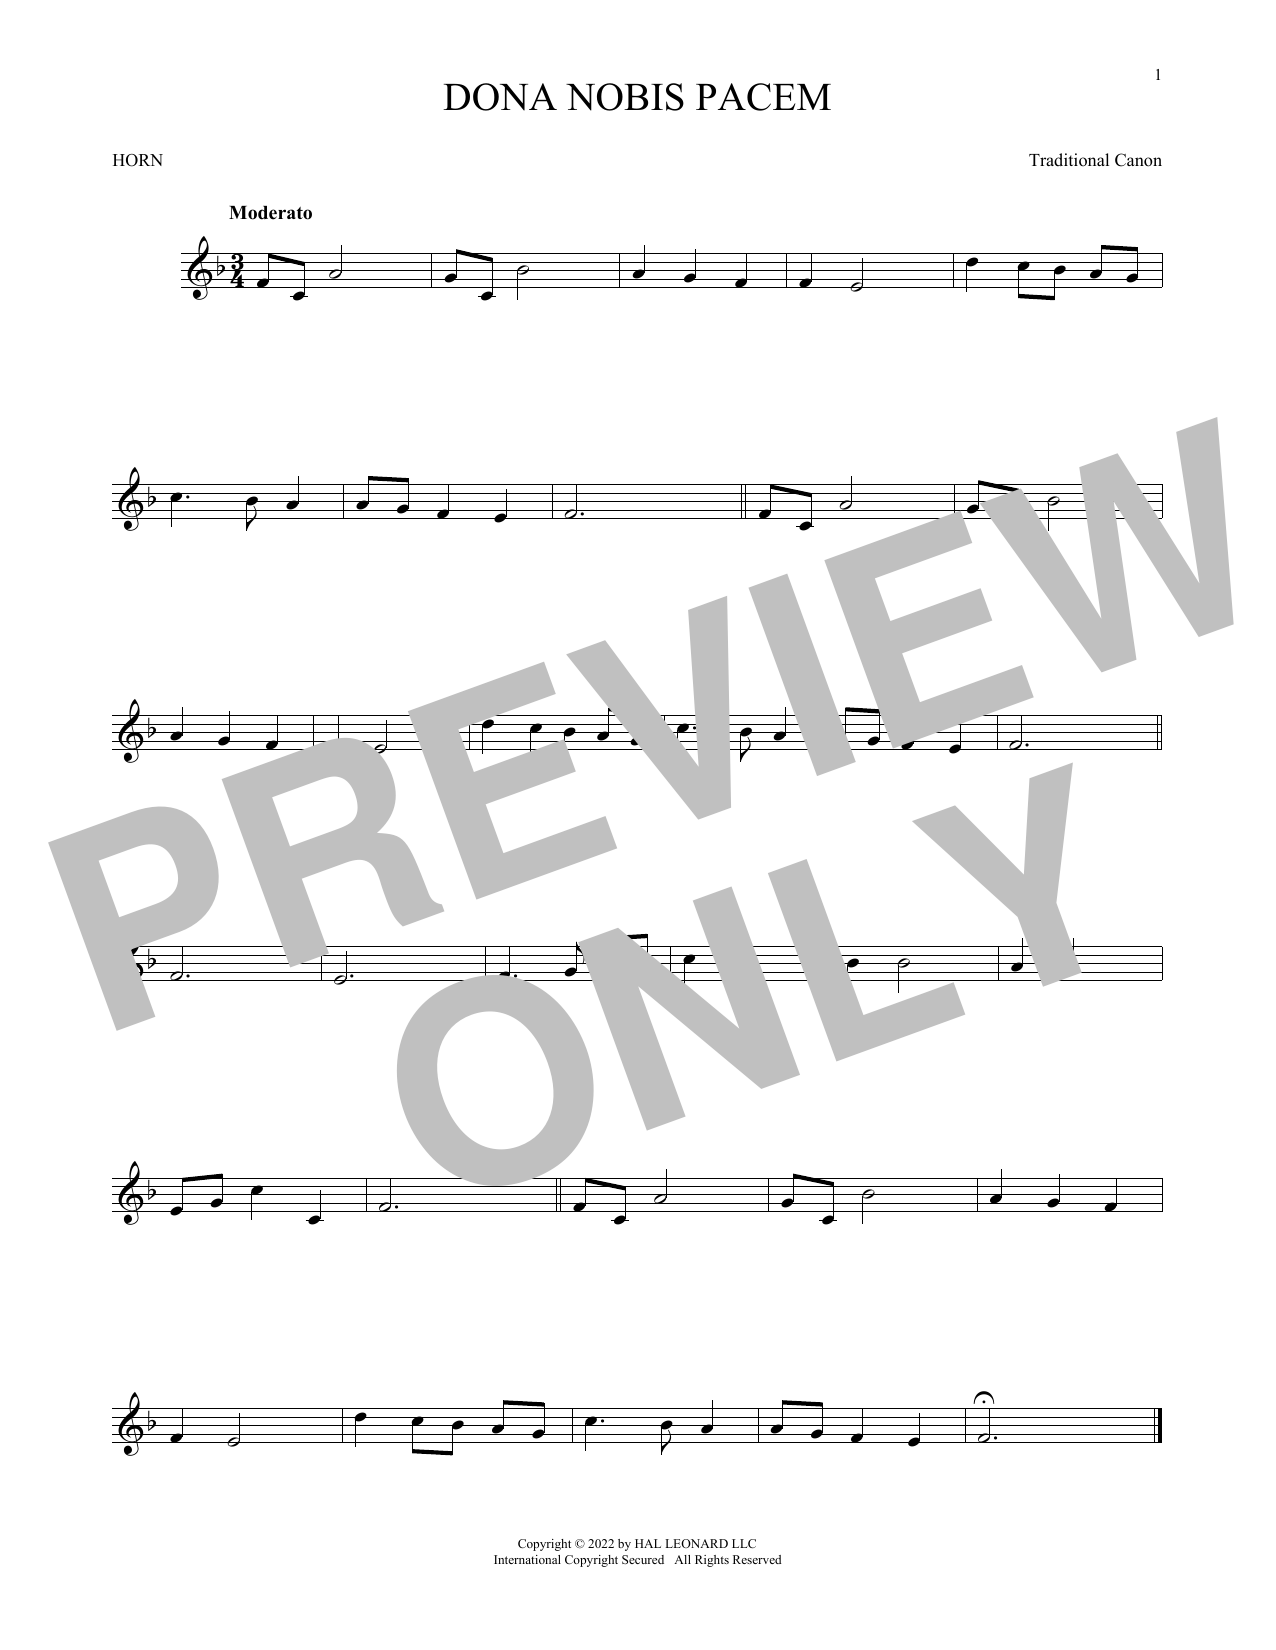 Download Traditional Canon Dona Nobis Pacem Sheet Music